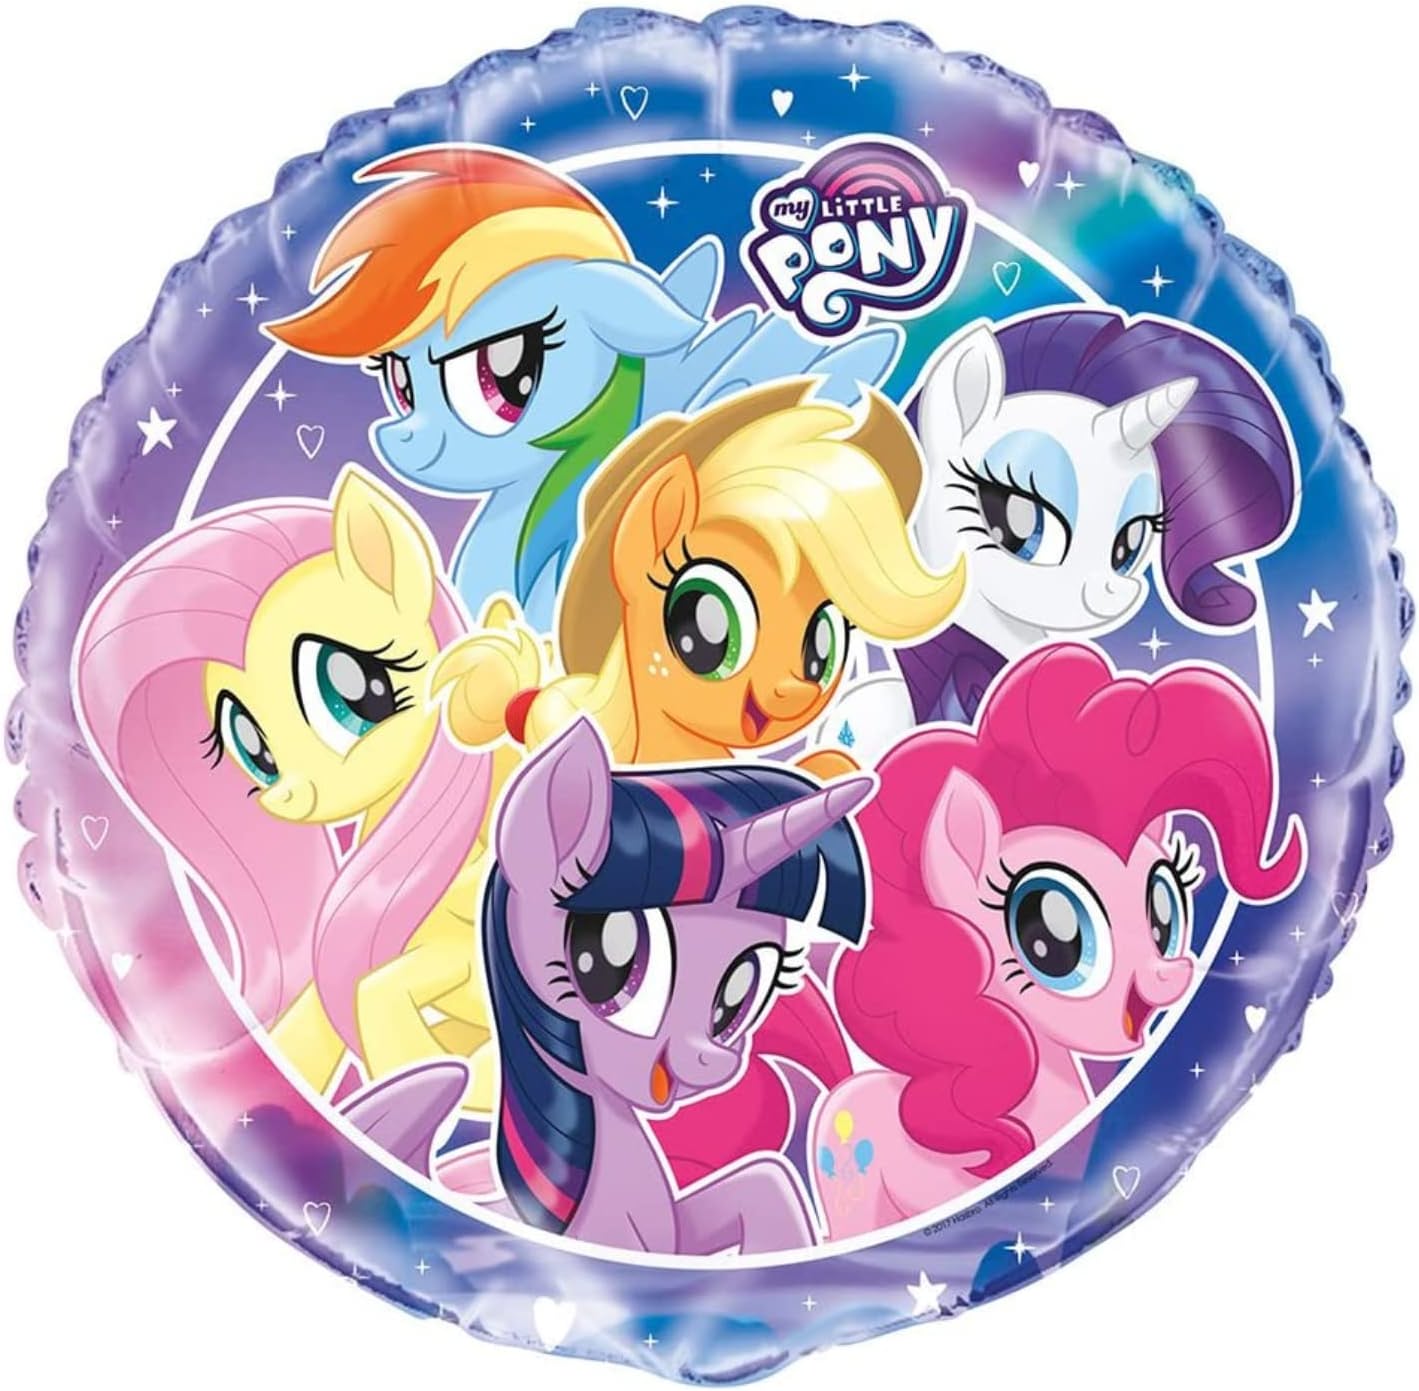 MLP Character Party Balloons 4-Pack Set 2